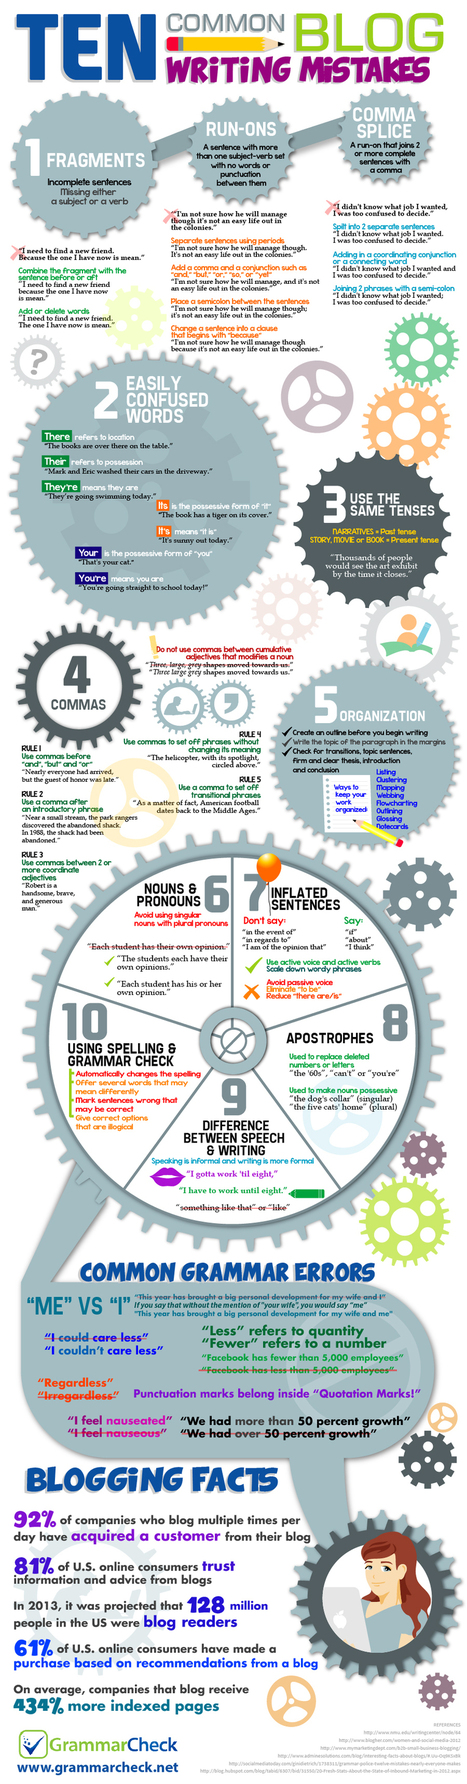 10 Common Blog Writing Mistakes (Infographic) | Strictly pedagogical | Scoop.it